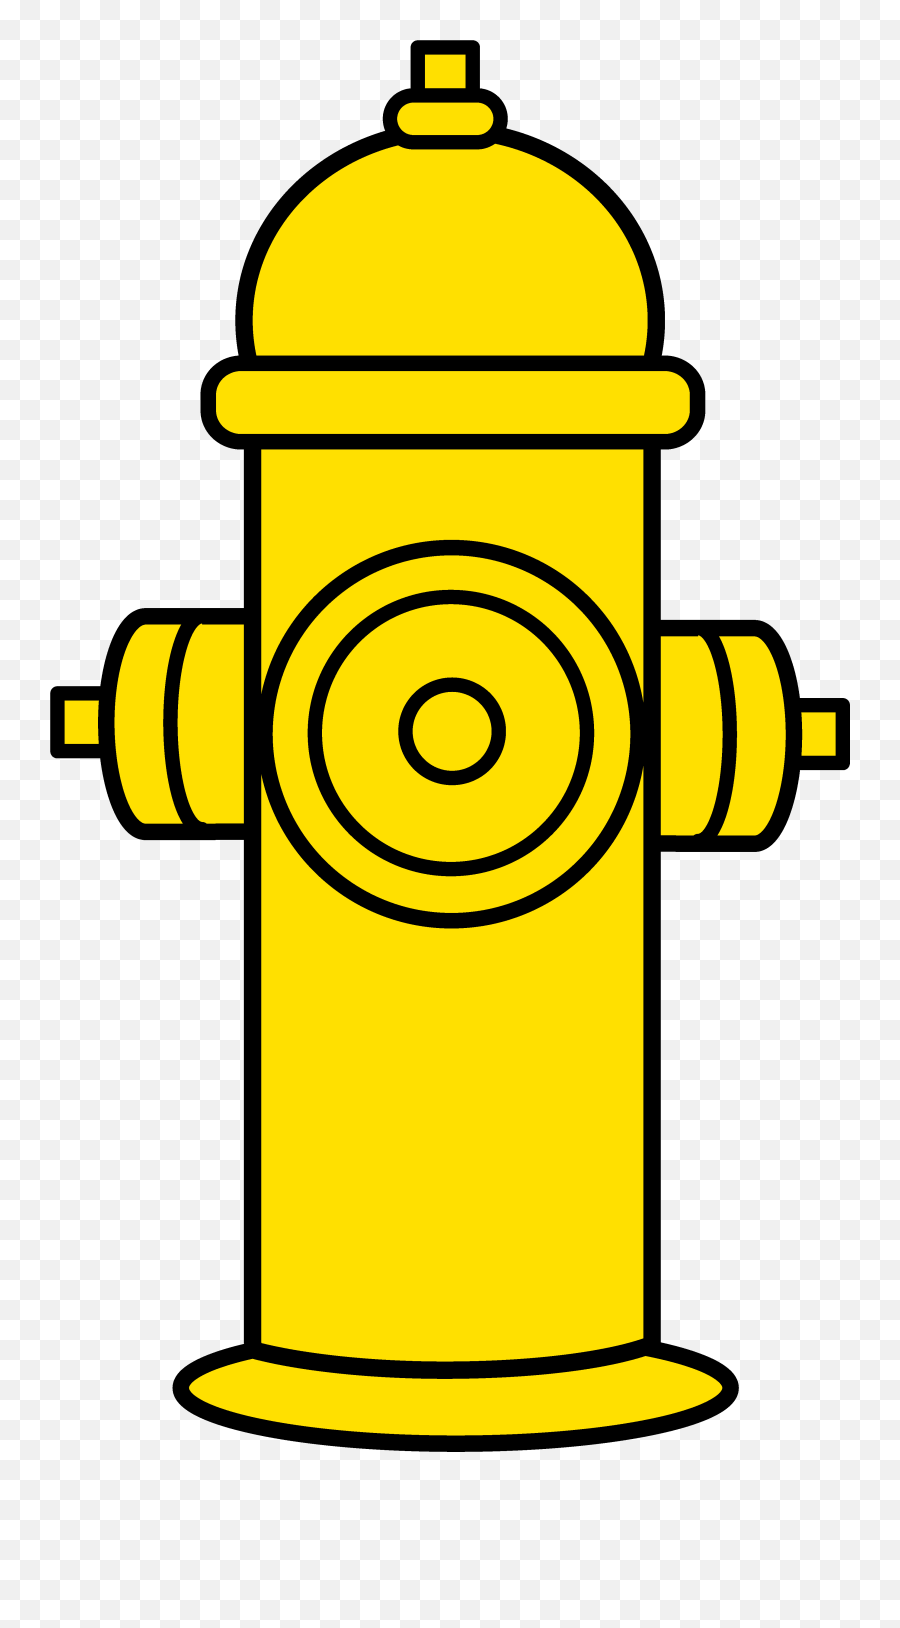 Fire Truck Clipart Fire Hydrant - Black And White Fire Yellow Fire Hydrant Clipart Emoji,Fire Truck Clipart